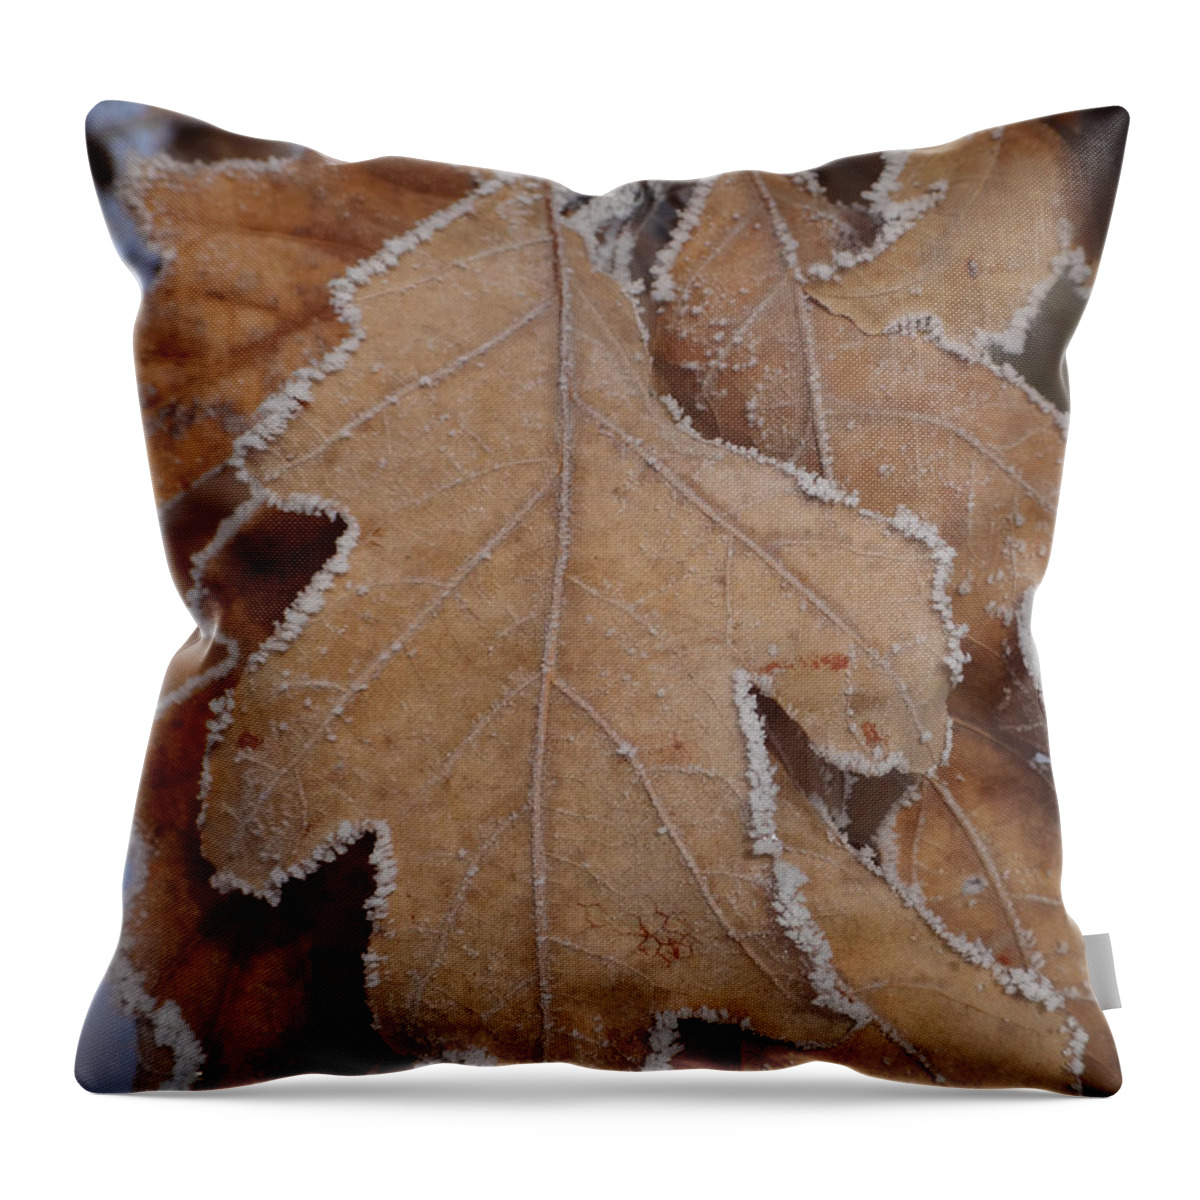 Frost Throw Pillow featuring the photograph Frosted Oak by Brooke Bowdren